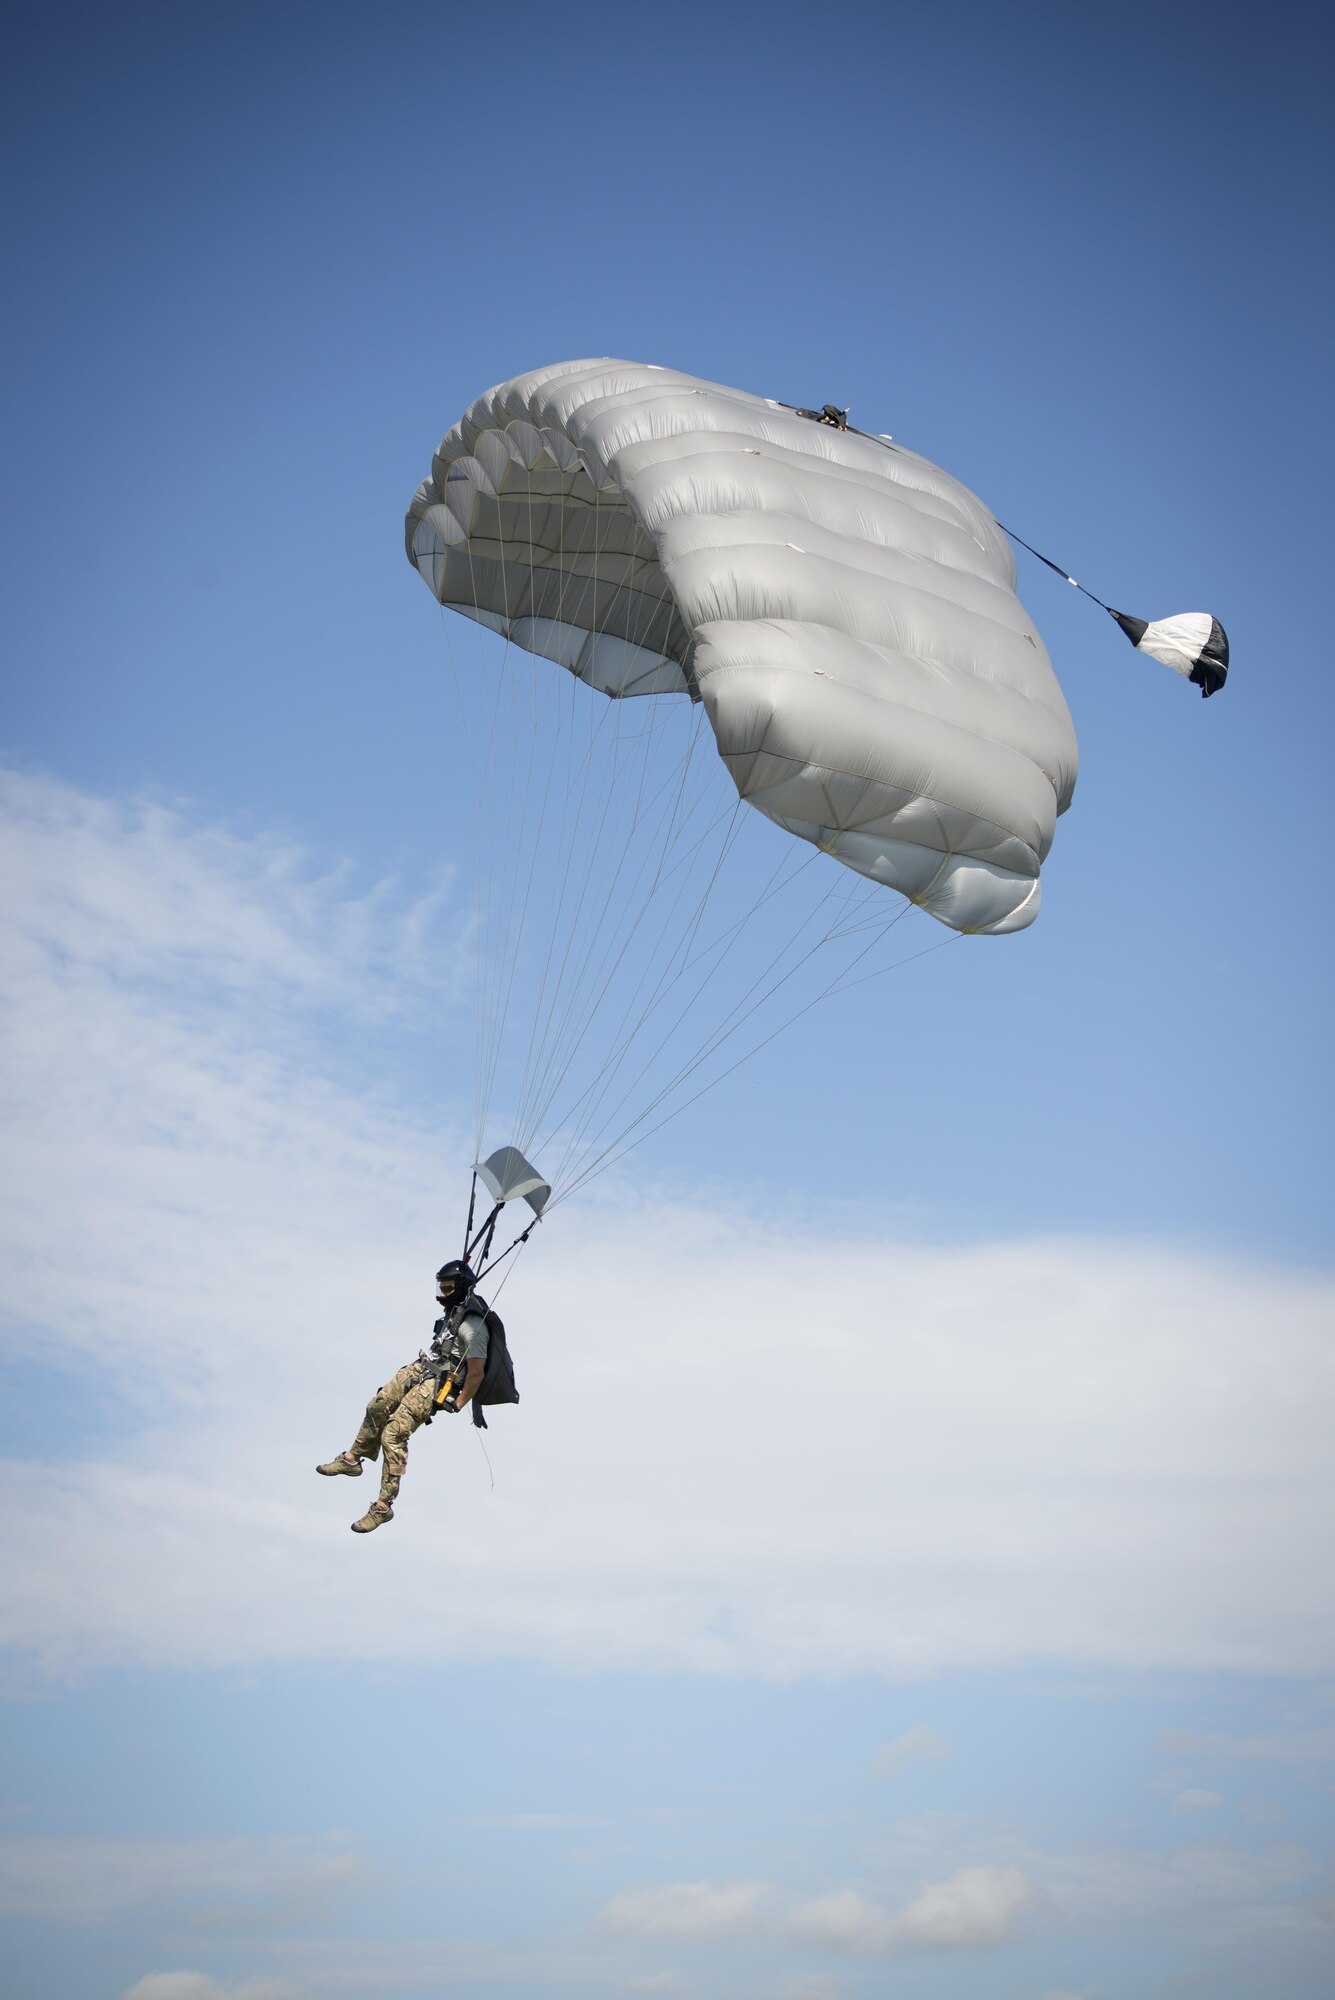 A pararescuman, or PJ, glides through the air during the 2016 Pararescue Rodeo hosted by the 920th Rescue Wing, Patrick Air Force Base, Florida, September 19, 2016. The rodeo, also known as a skills competition, was a week-long event which tested PJs on skill sets such as precision-parachute jumping, rifle and pistol accuracy shooting, open-ocean surface swimming, high-angle and confined space rescues, water rescues and overall physical endurance. (U.S. Air Force photo/ 2nd Lt. Katie Spencer)